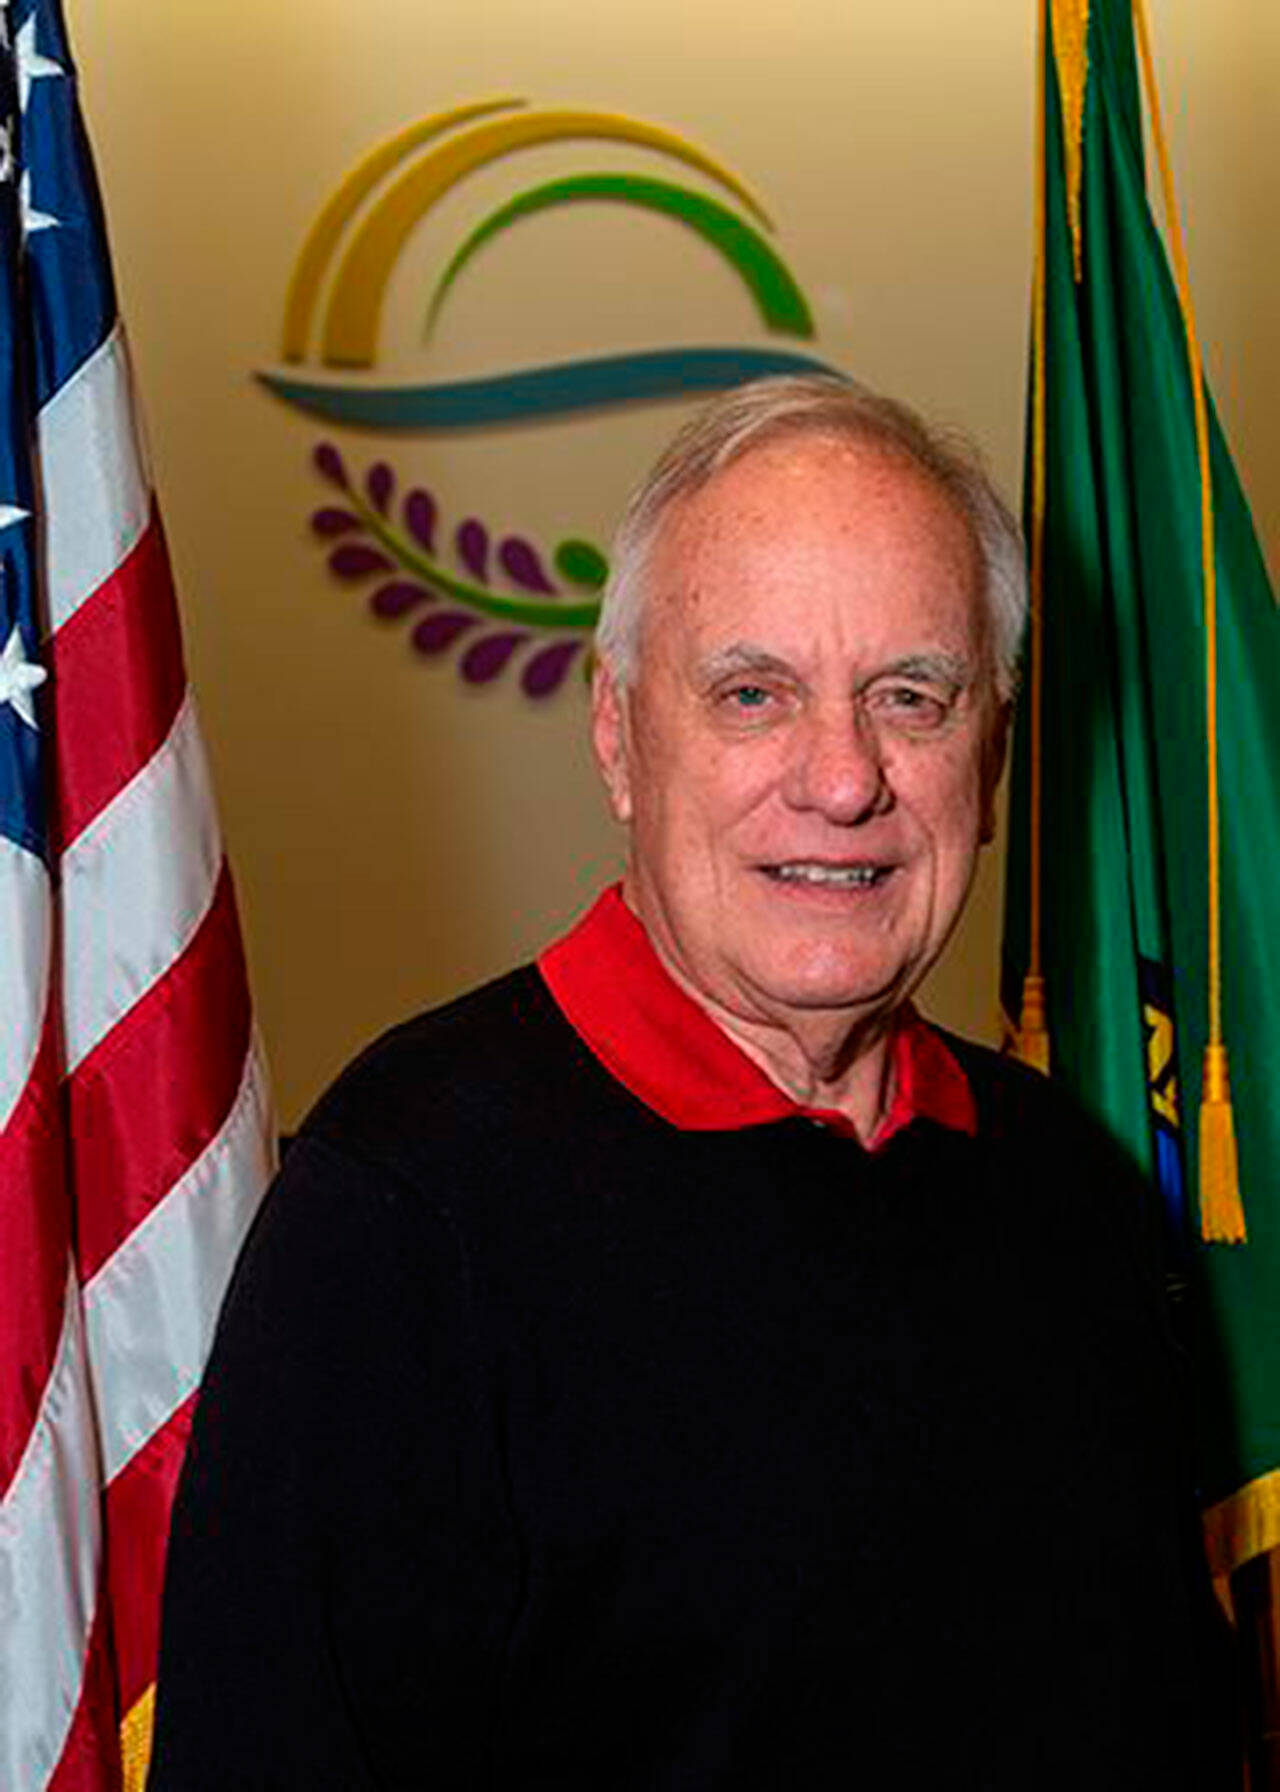 Photo courtesy City of Sequim/ Tom Ferrell was elected to the City of Sequim’s city council in 2019 and reelected in 2023. He resigned from the position on March 11 and councilors have opened up his seat to applicants through March 22.